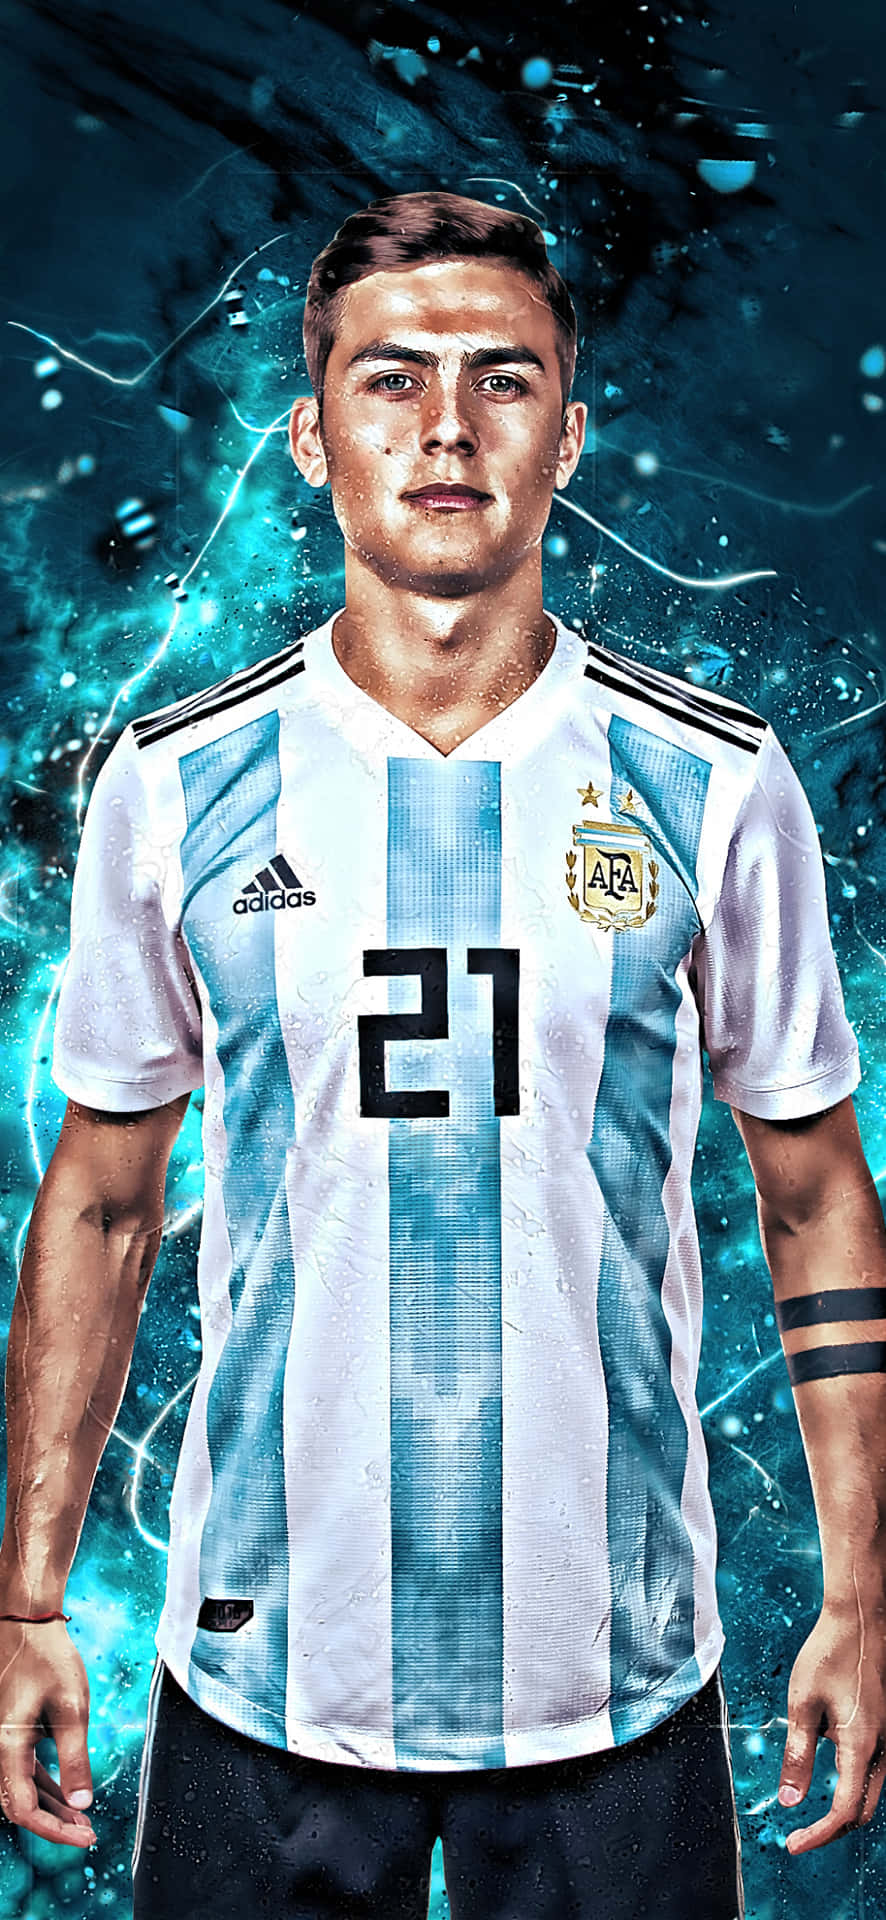 Dynamic Paulo Dybala In Action During A Football Match Wallpaper